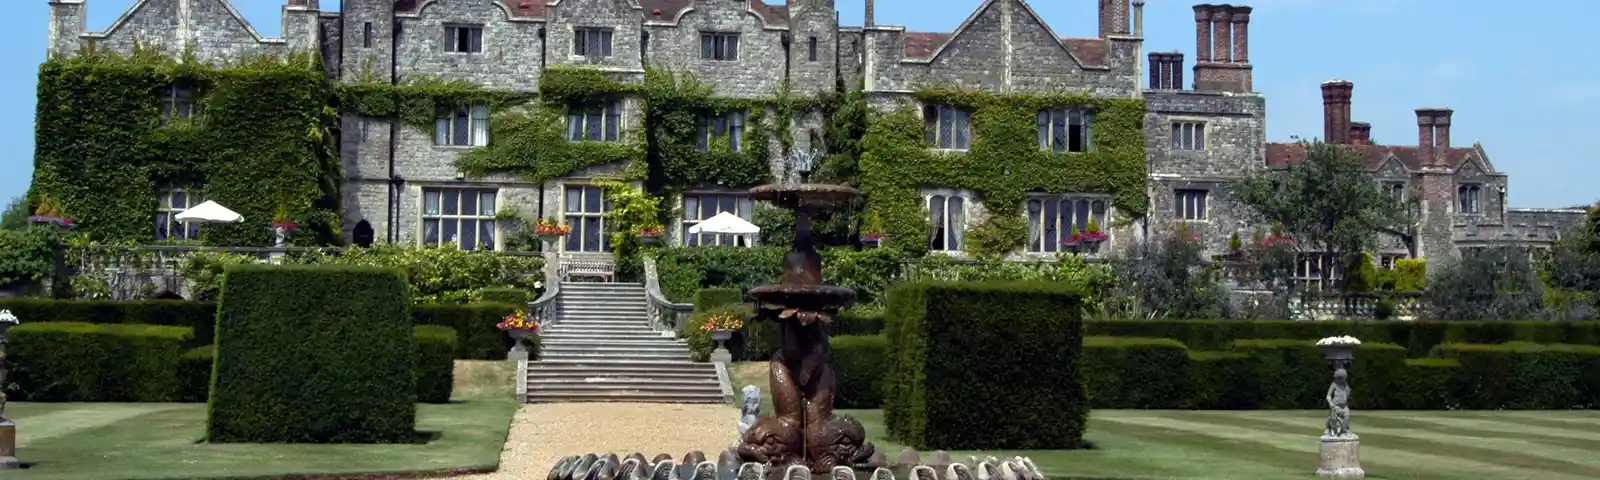 eastwell-manor---hotel-rear-with-fountain.jpg